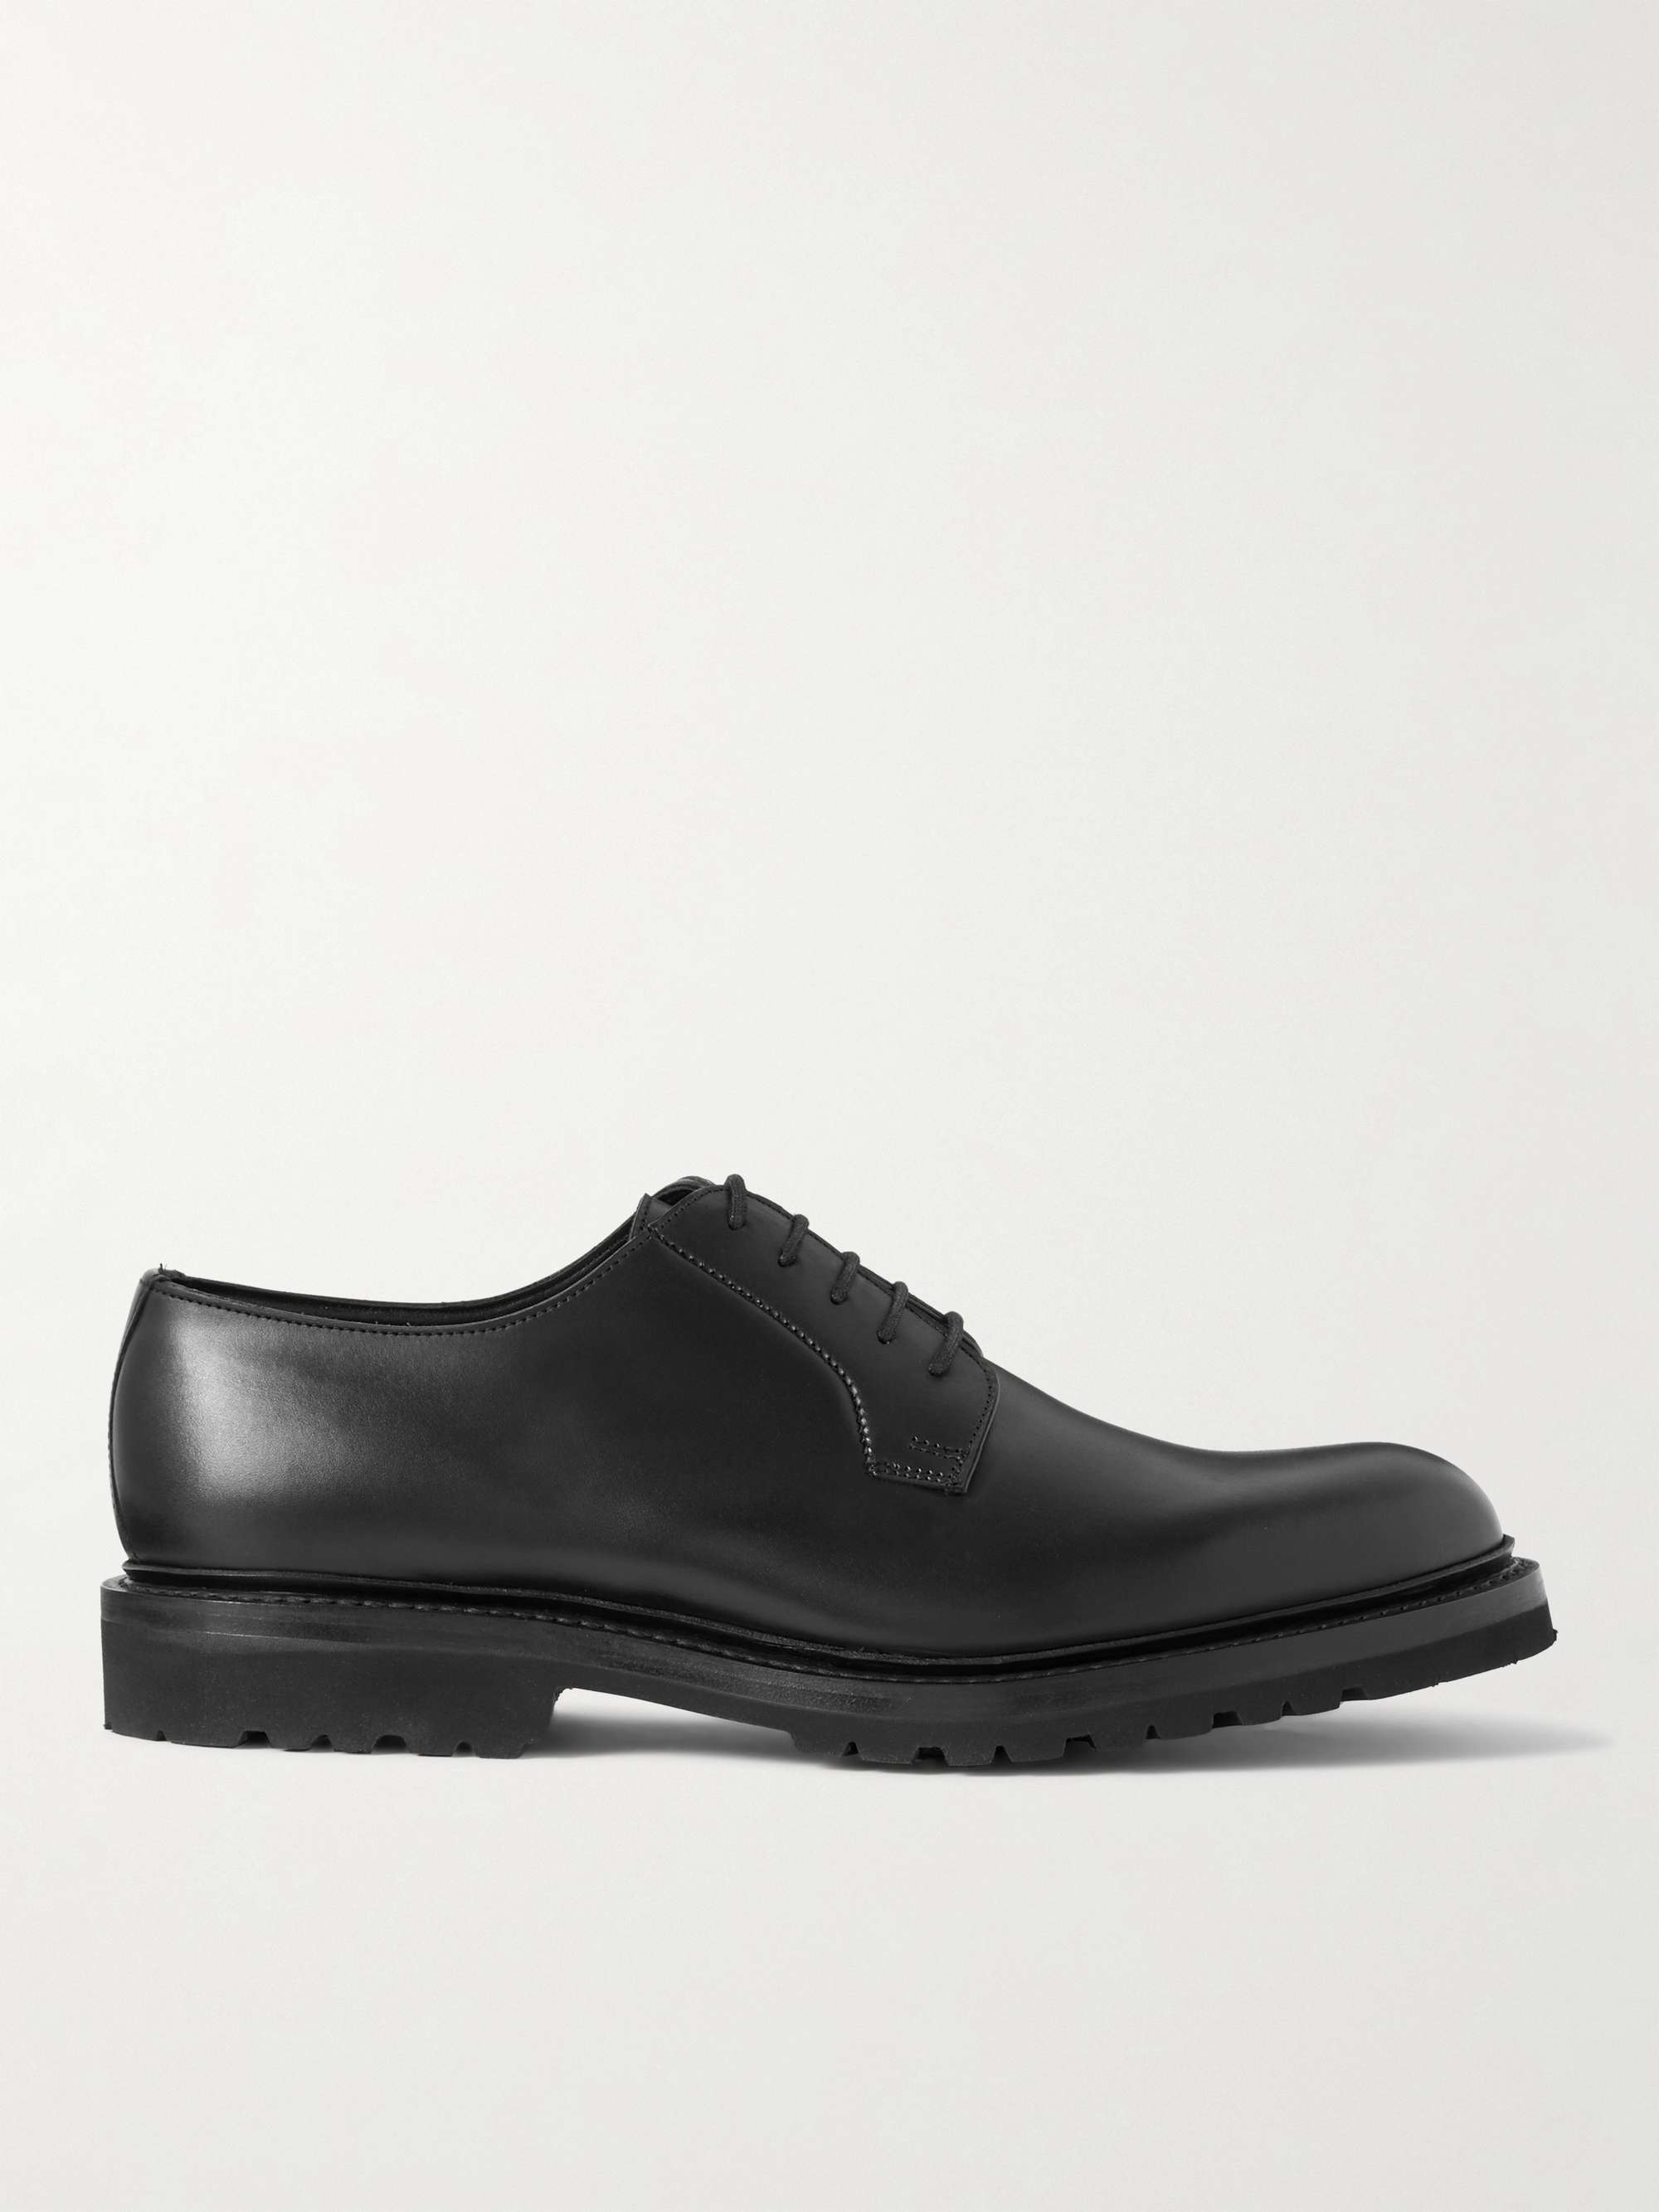 GEORGE CLEVERLEY Archie Leather Derby Shoes for Men | MR PORTER